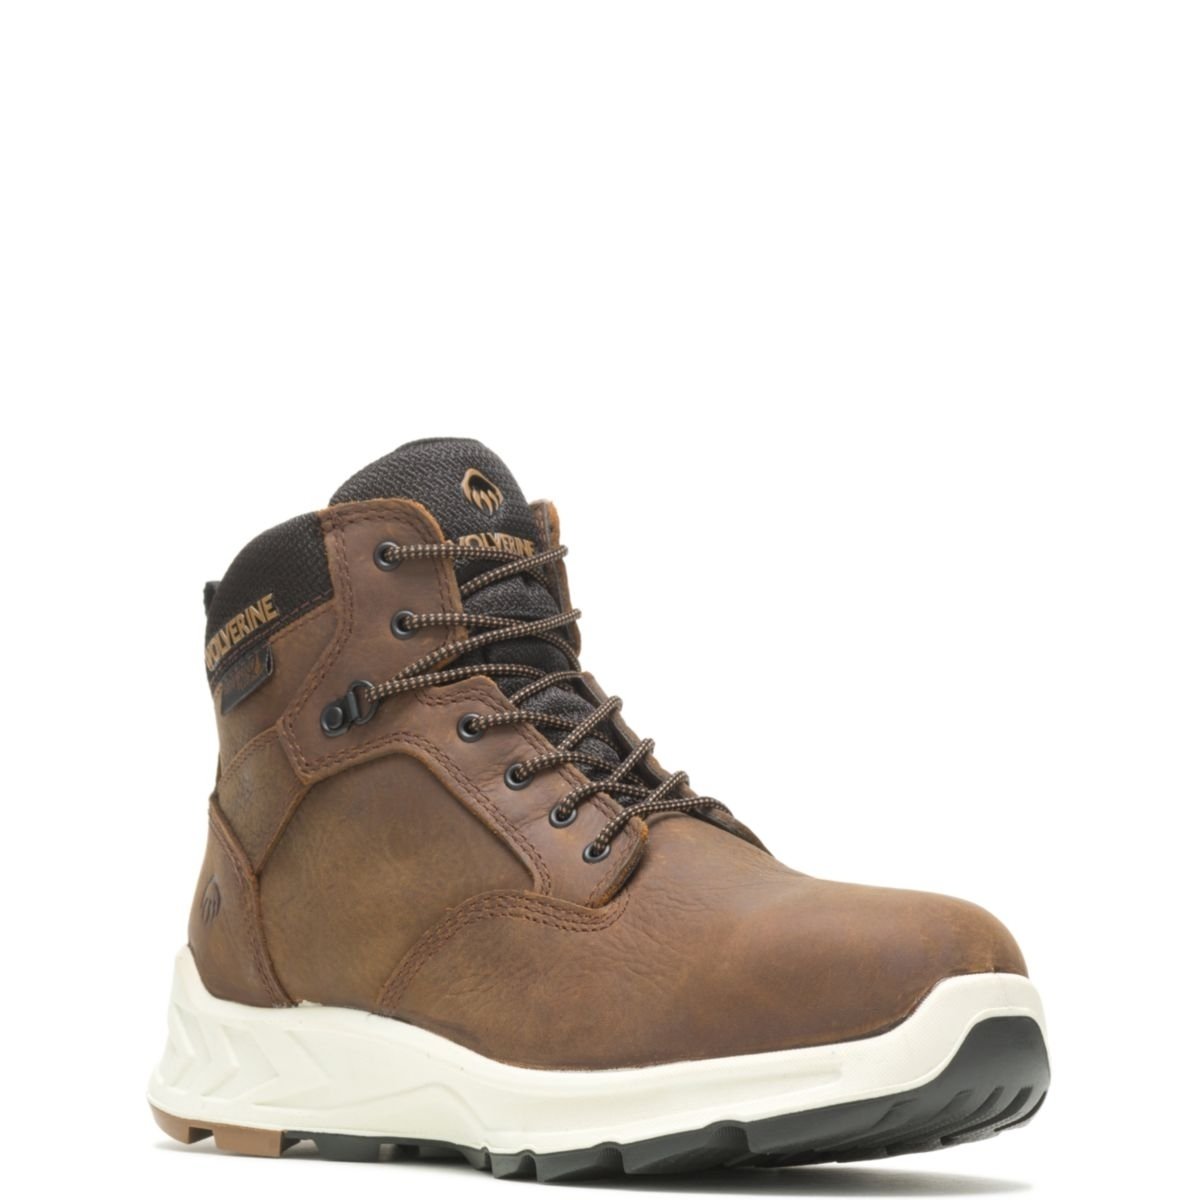 WOLVERINE Men's ShiftPlus Work LX 6 Alloy Toe Work Boot Brown - W201156 BROWN - BROWN, 8.5-M